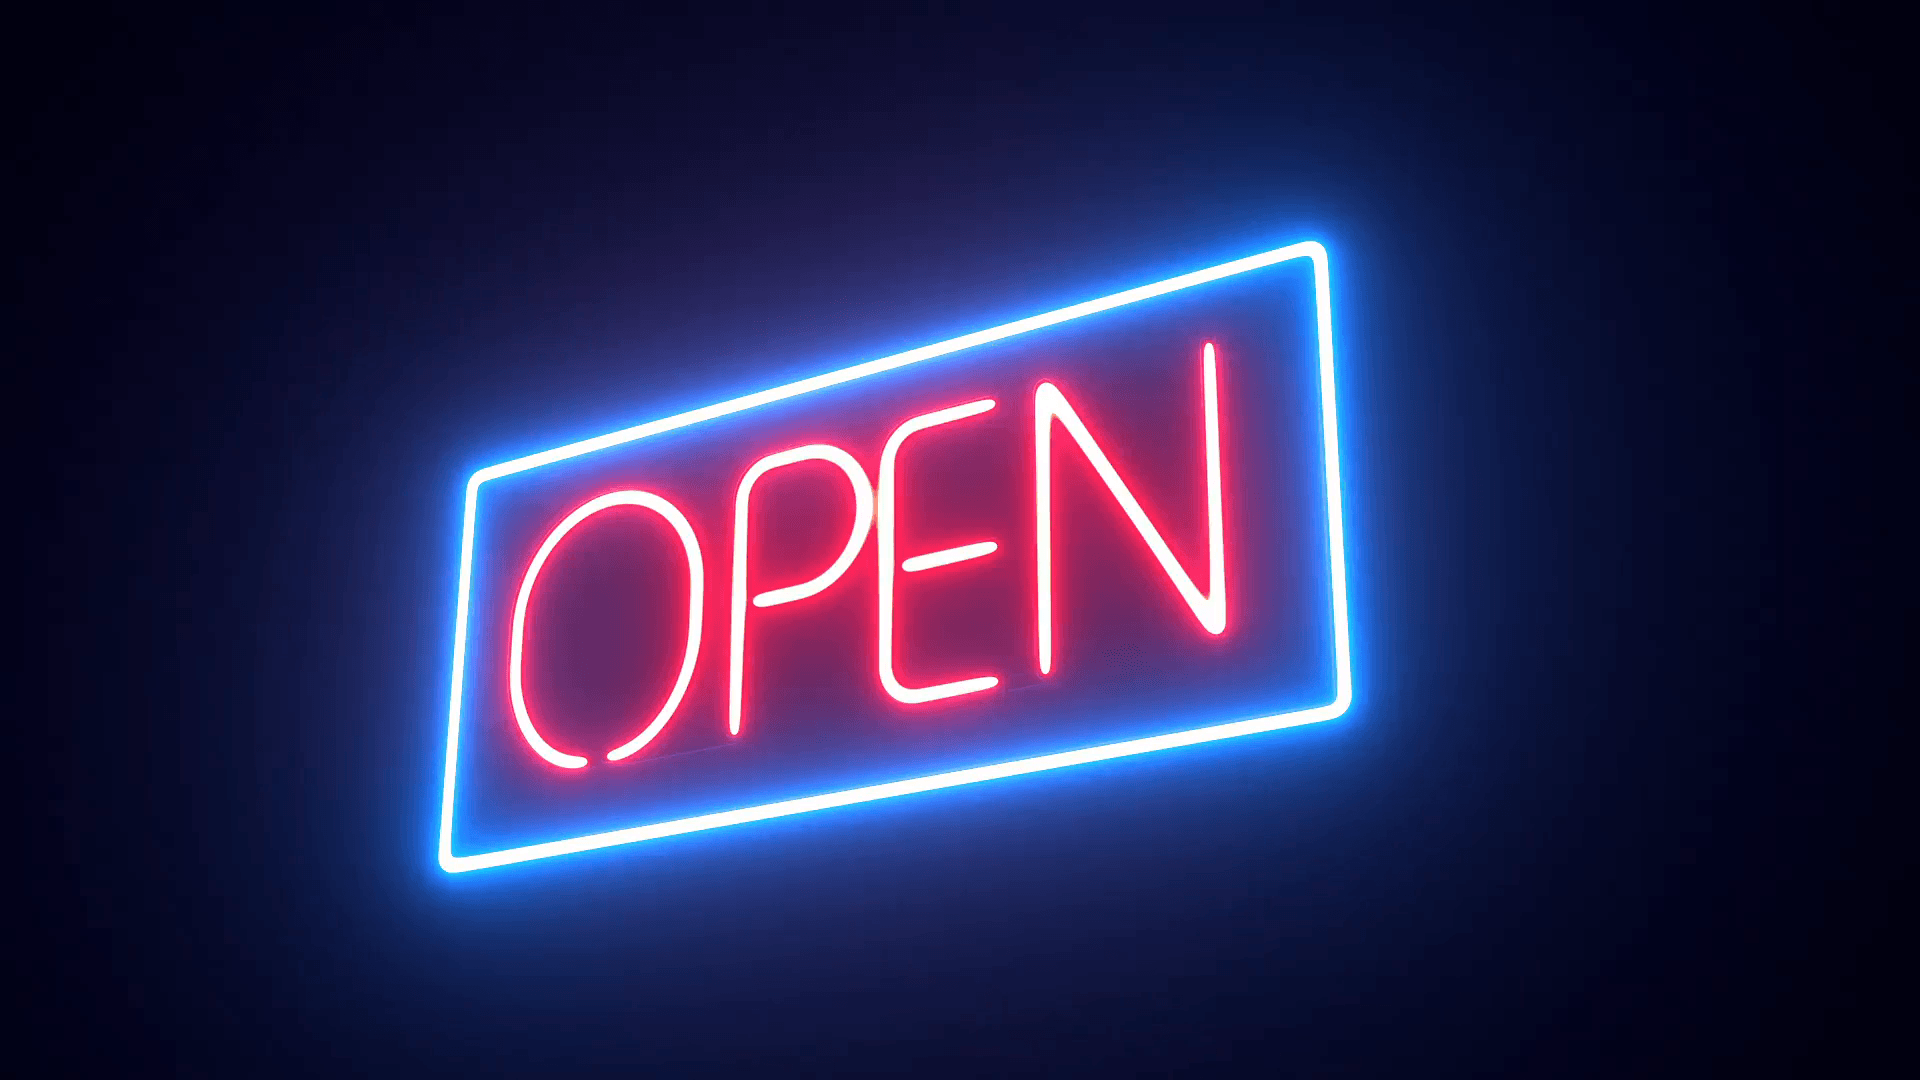 Square Open Neon Sign Loop from Side Motion Background